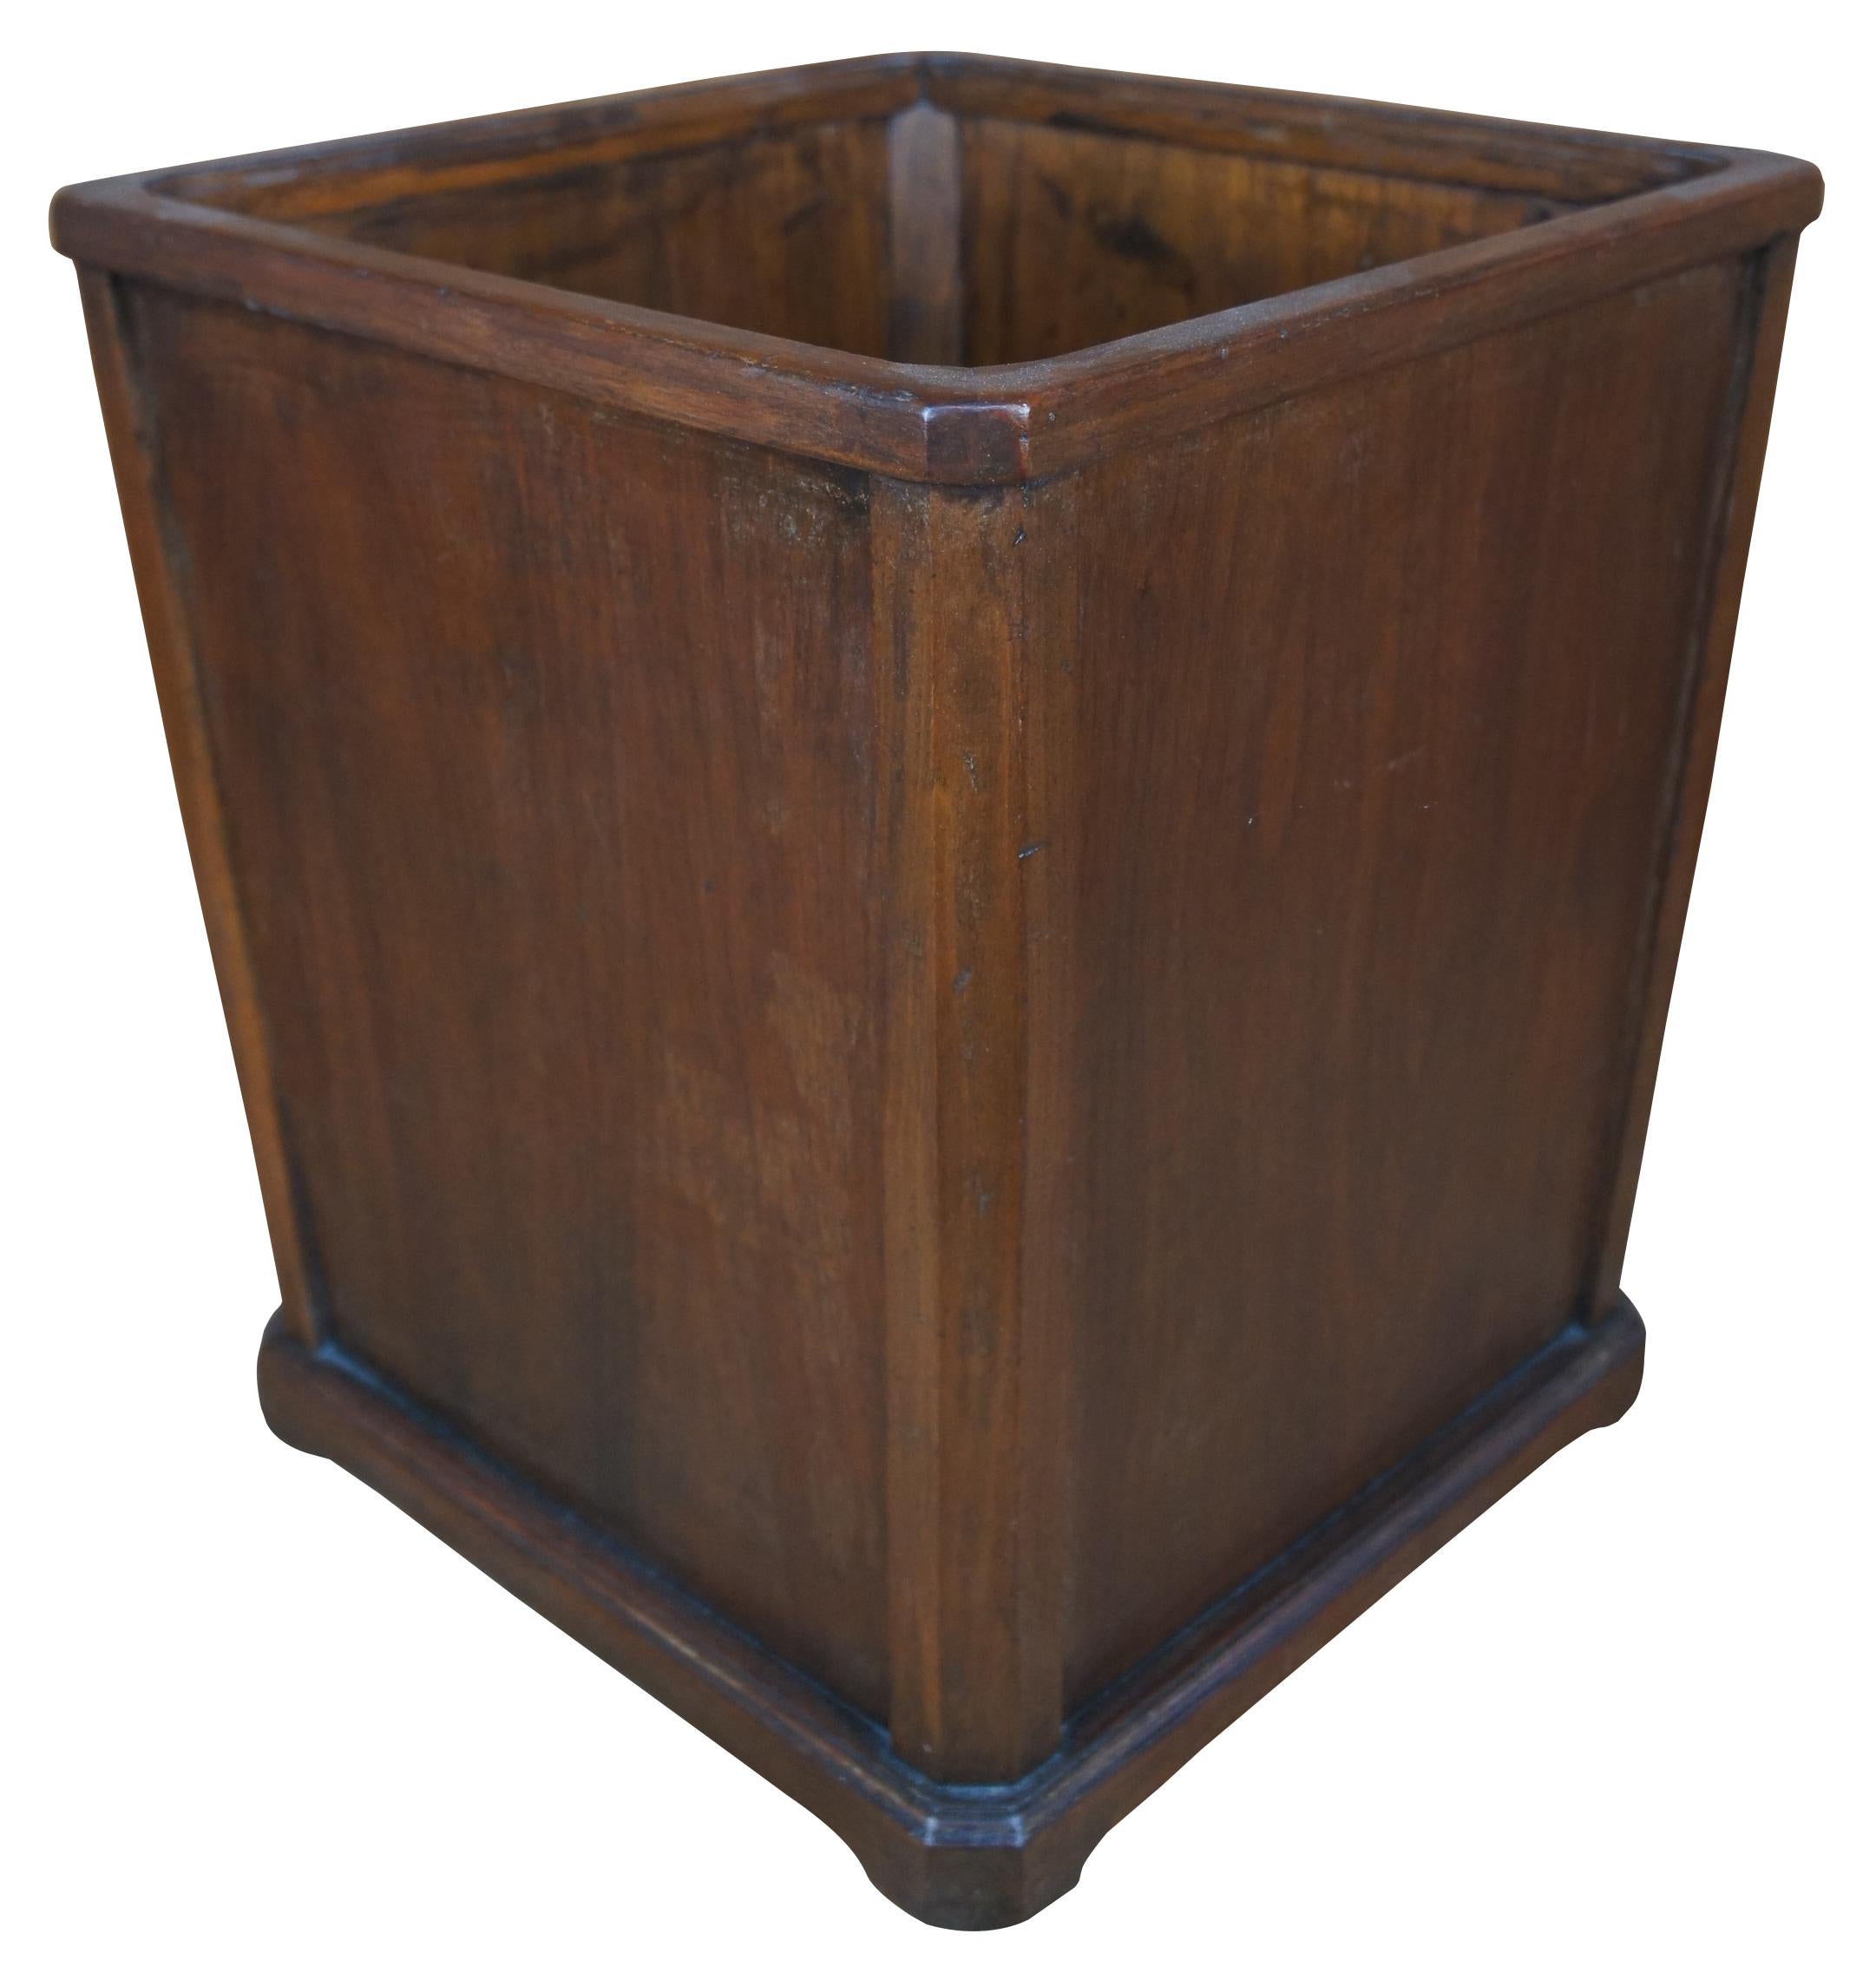 Large mid century modern executive desk walnut waste basket or wood trash can with square tapered form, attributed to Nucraft. Founded in Grand Rapids, Michigan, in 1945 by George W. Schad, Nucraft’s early days were built upon an idea to craft solid